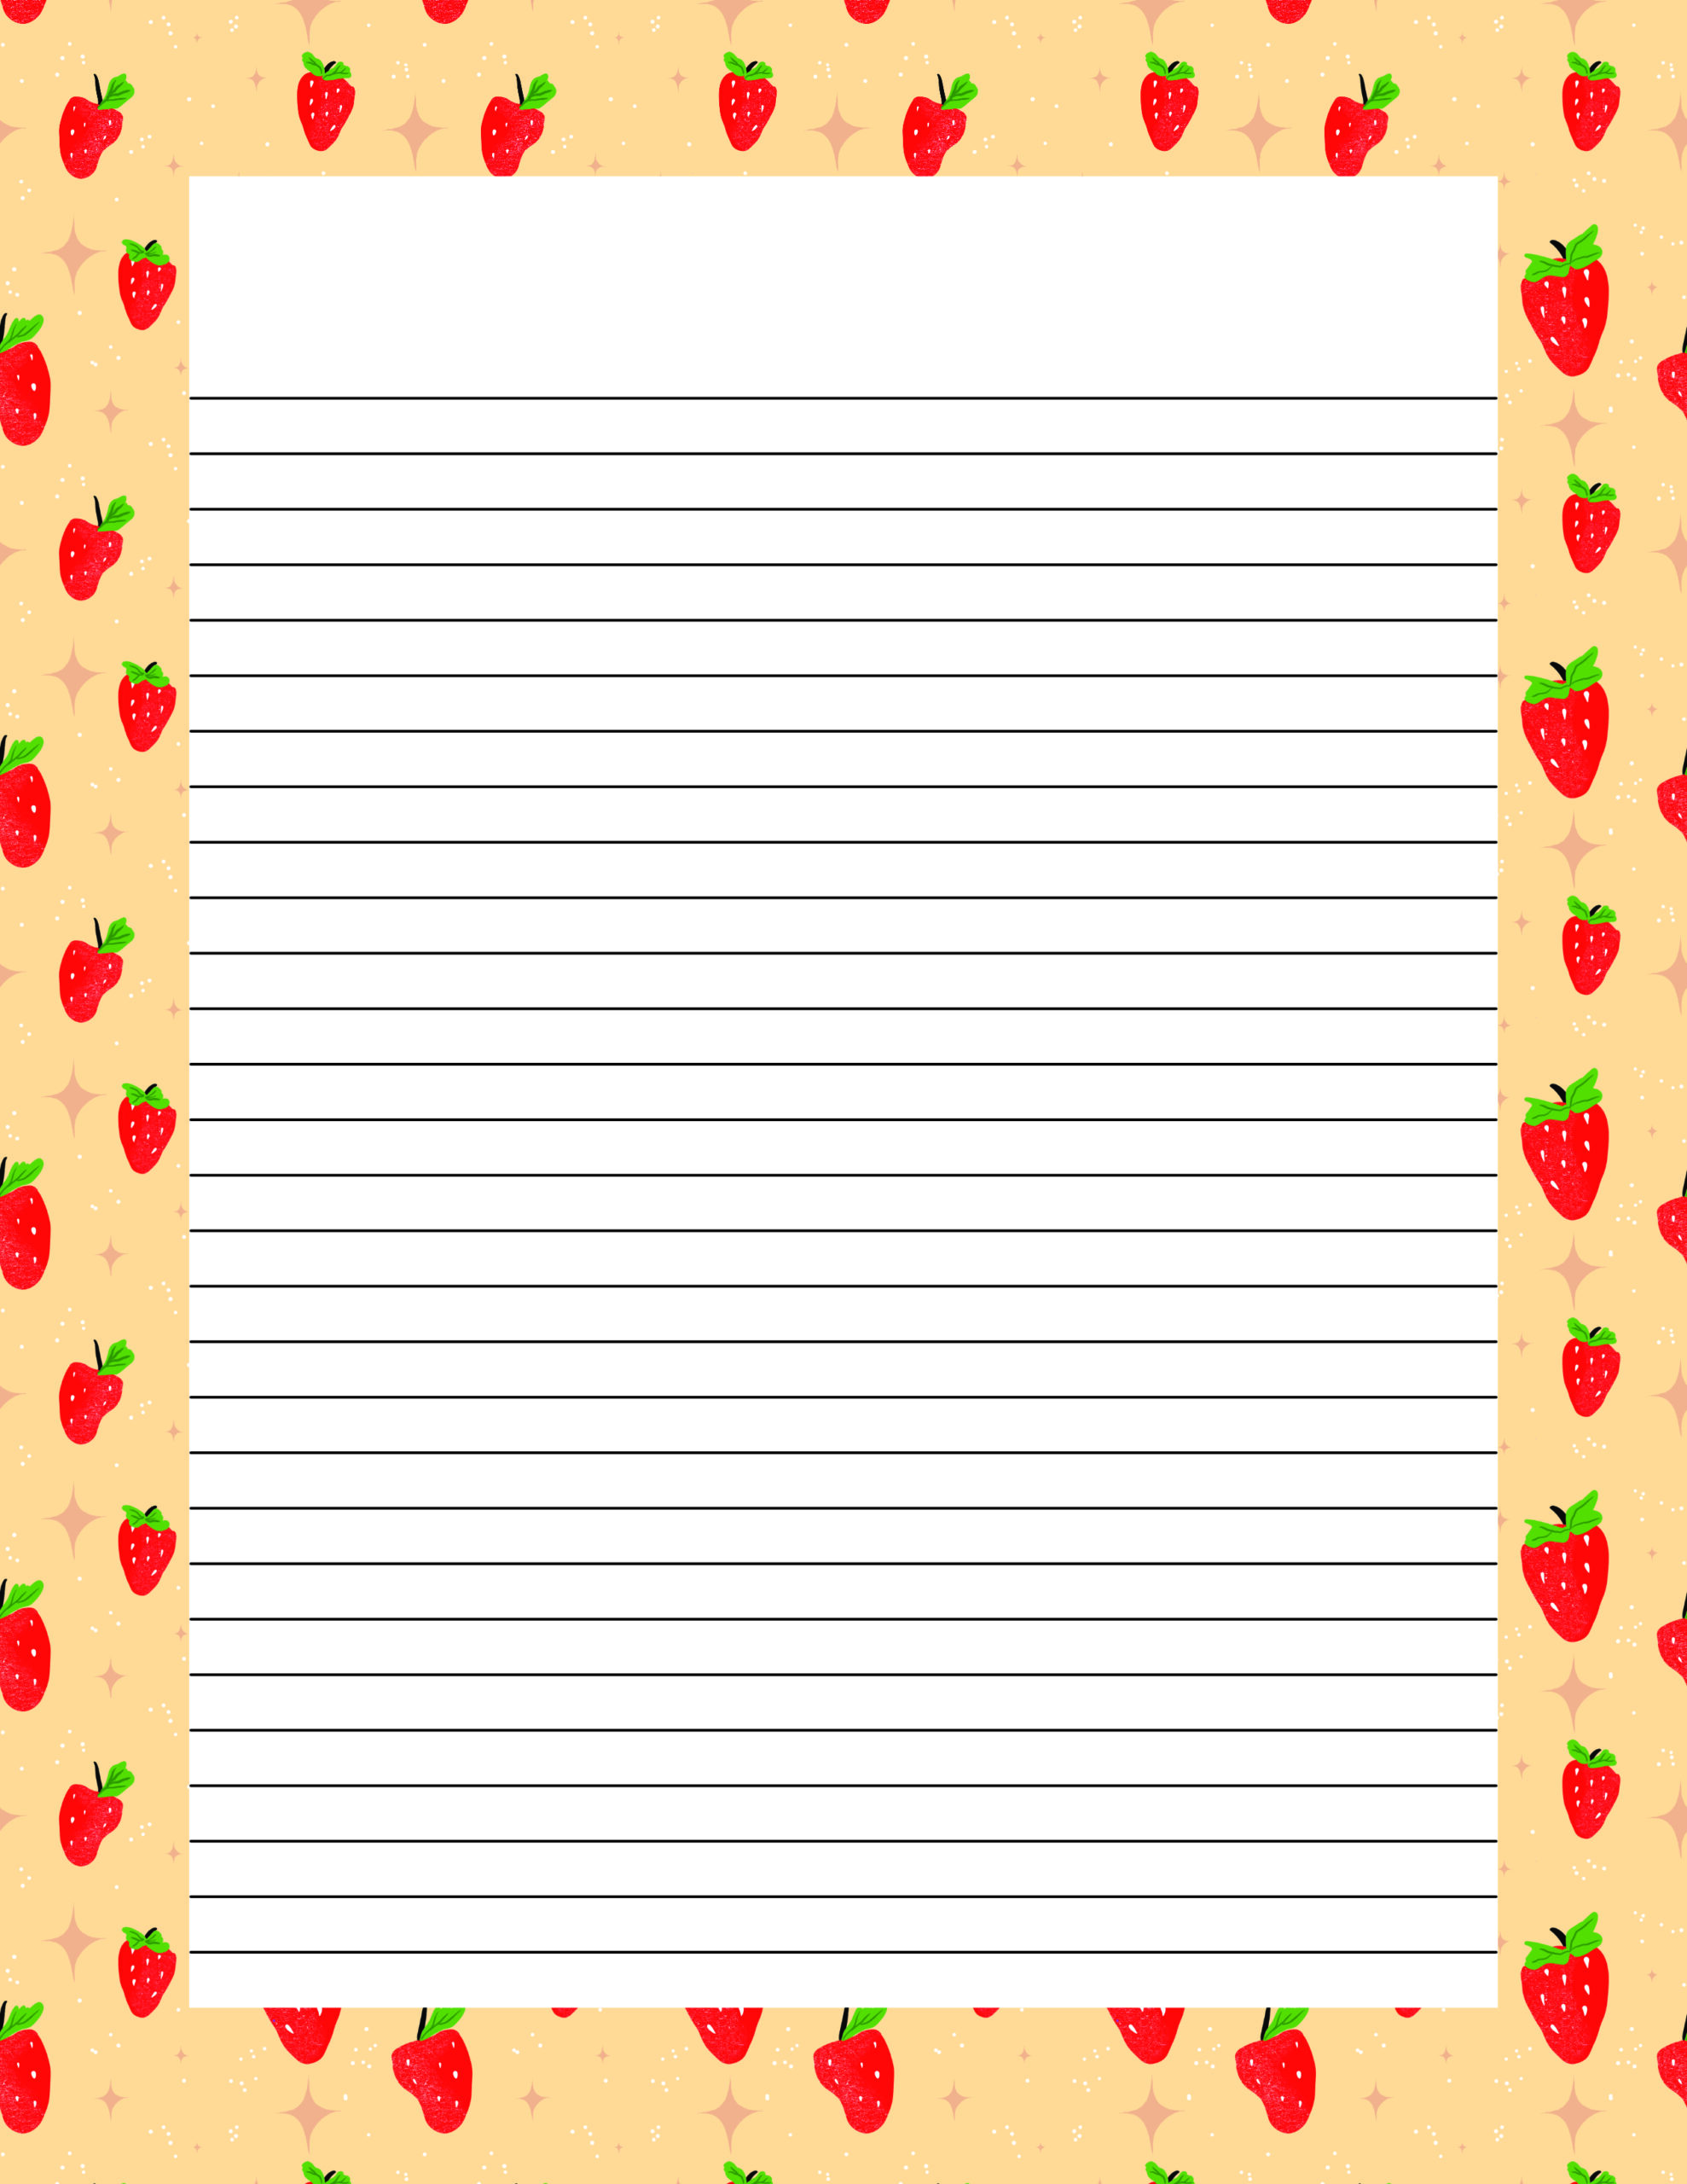 Printable Lined Paper